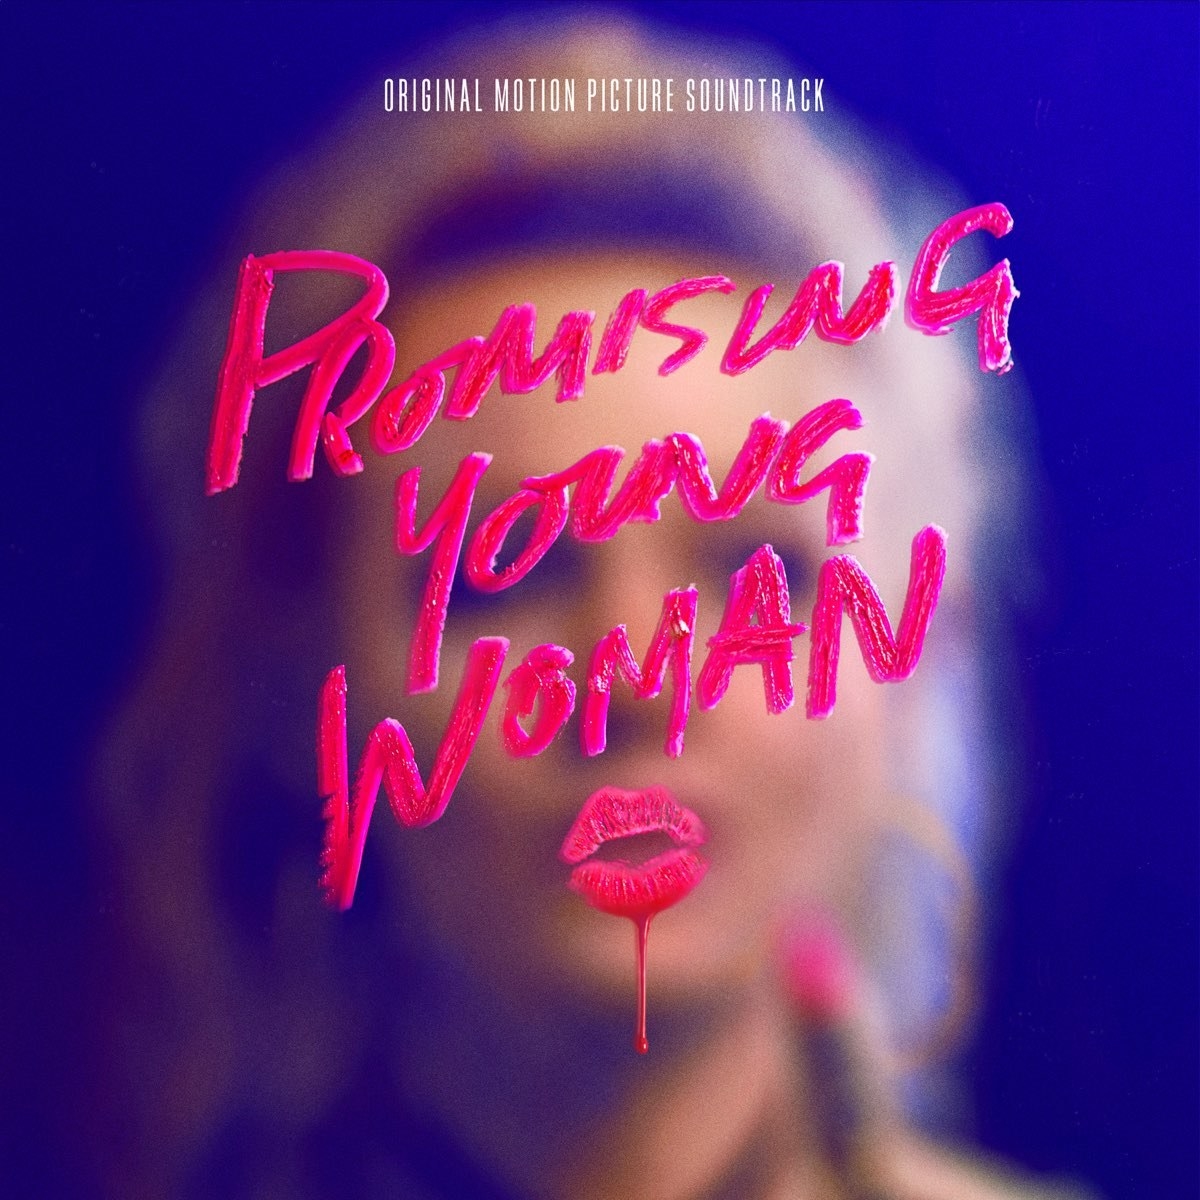 The album cover for Promising Young Woman